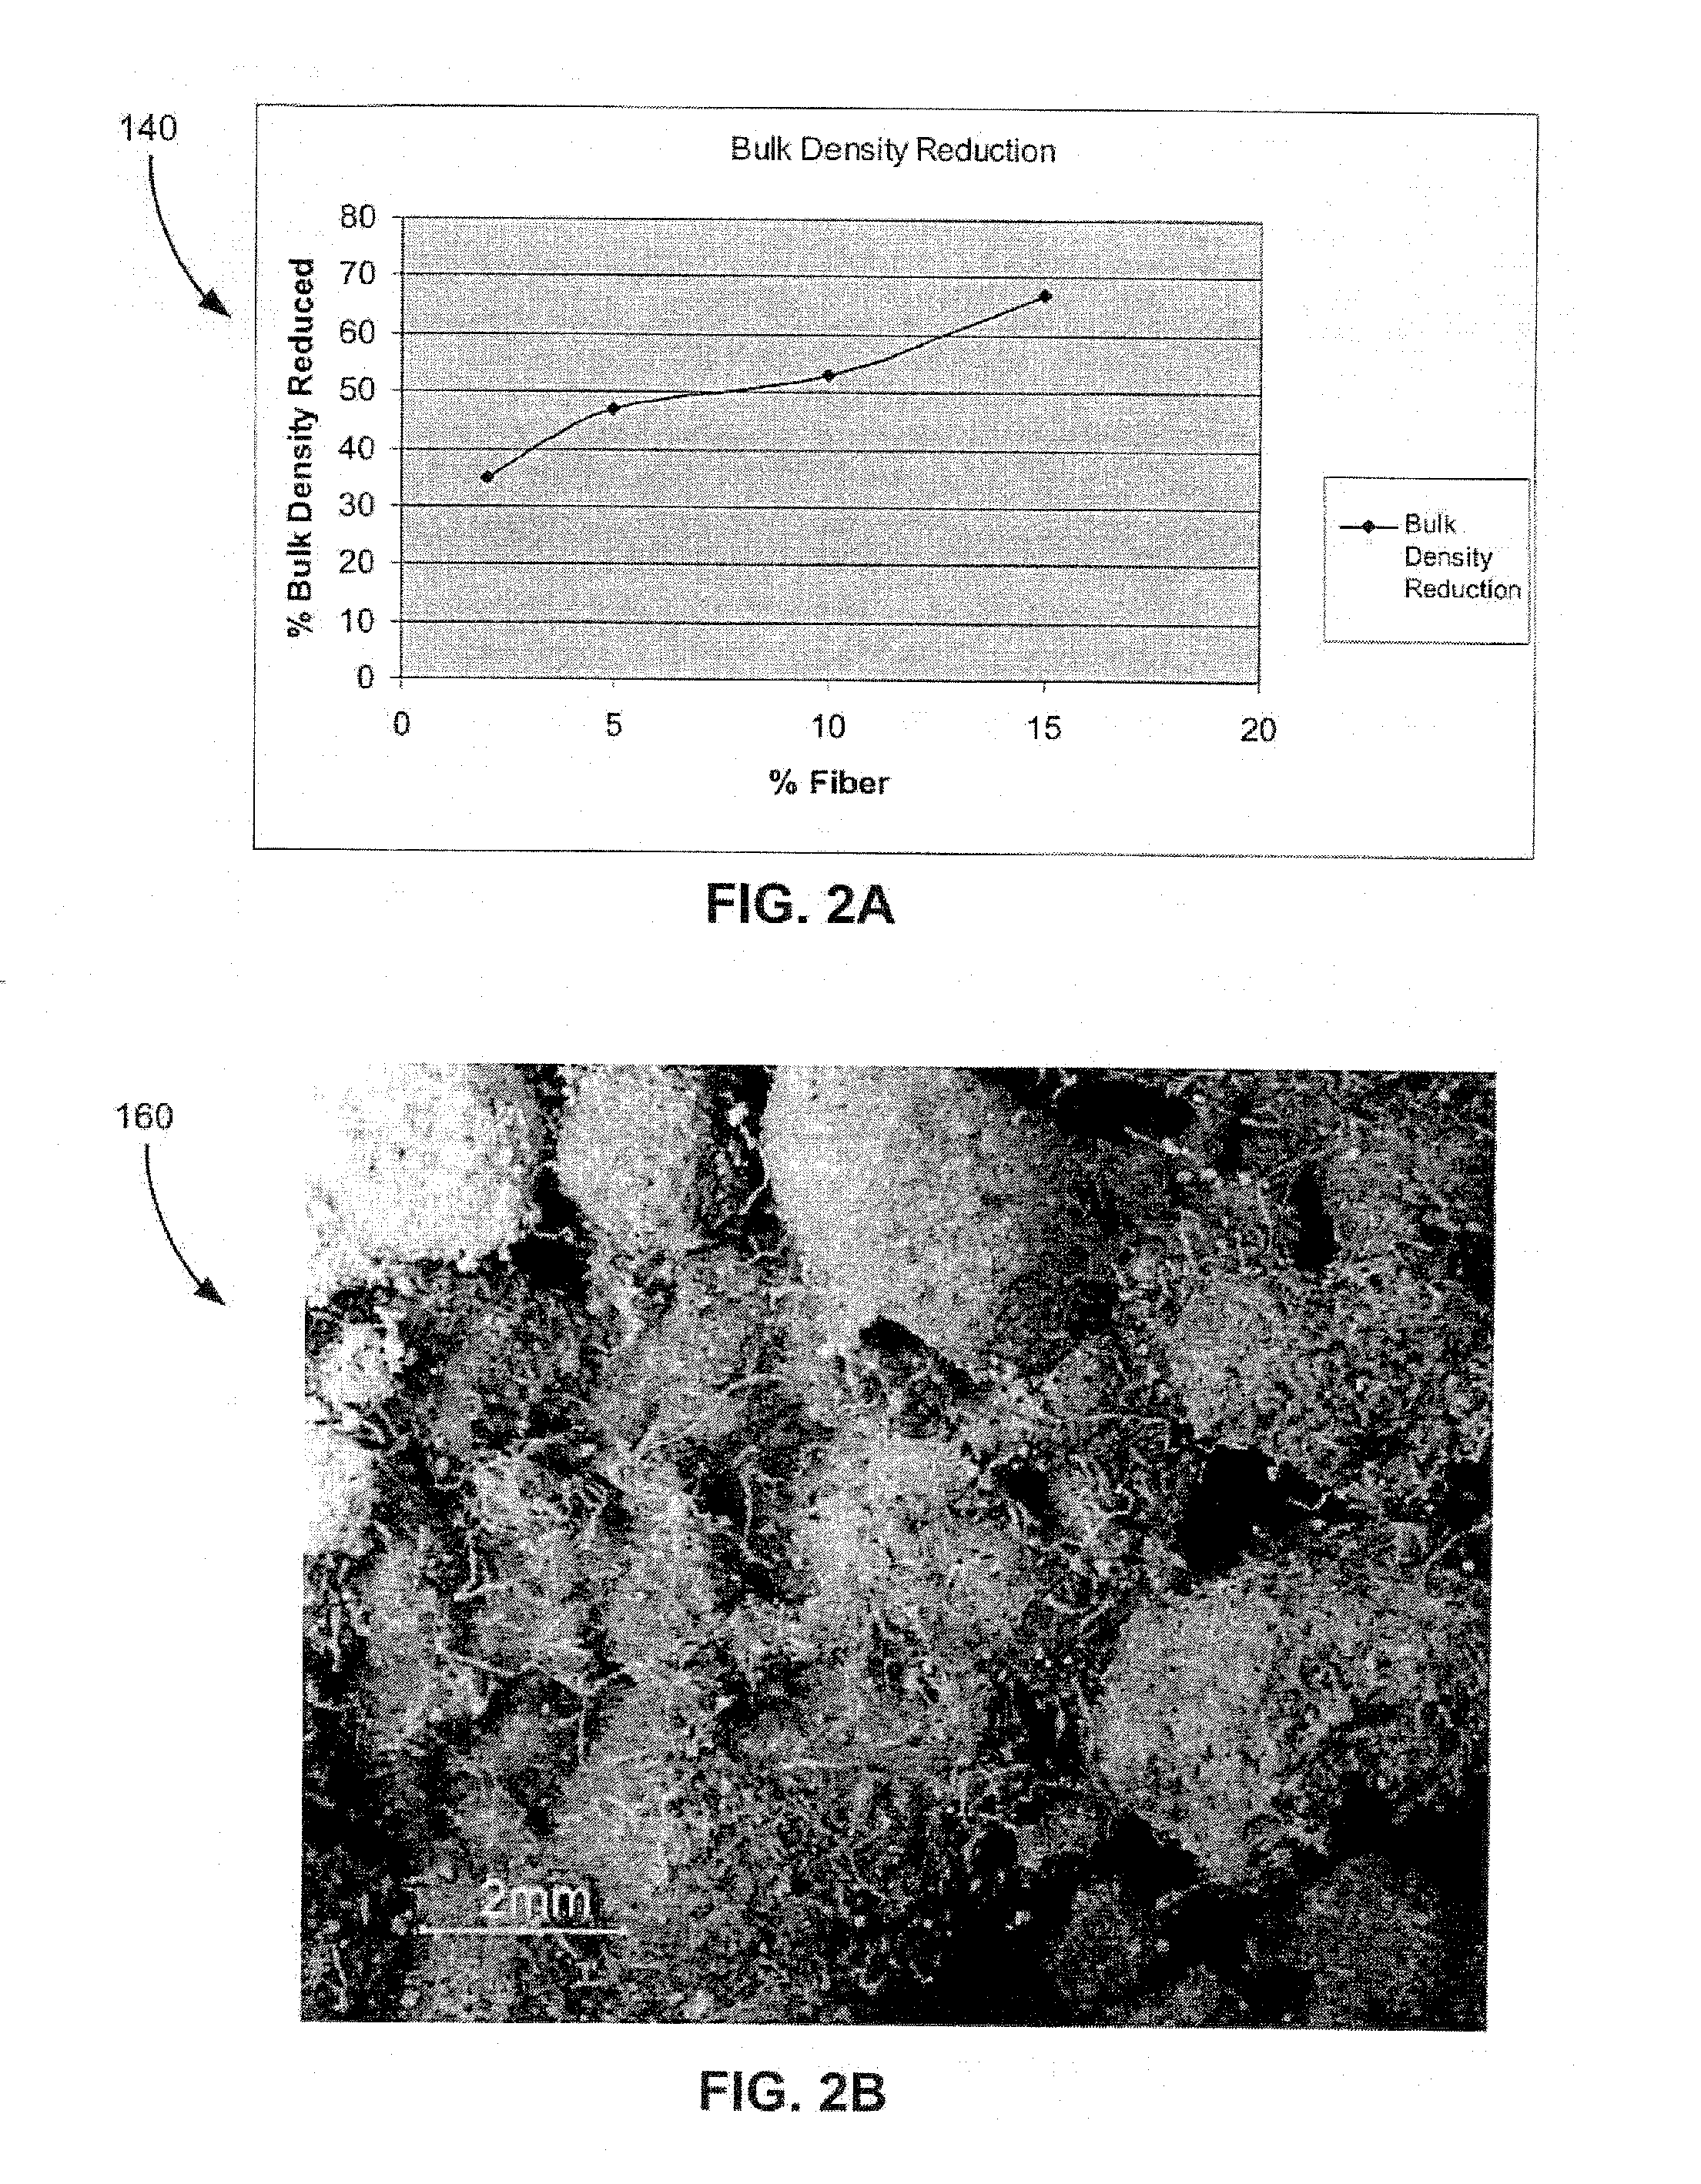 Composite Absorbent Particles with Superabsorbent Material